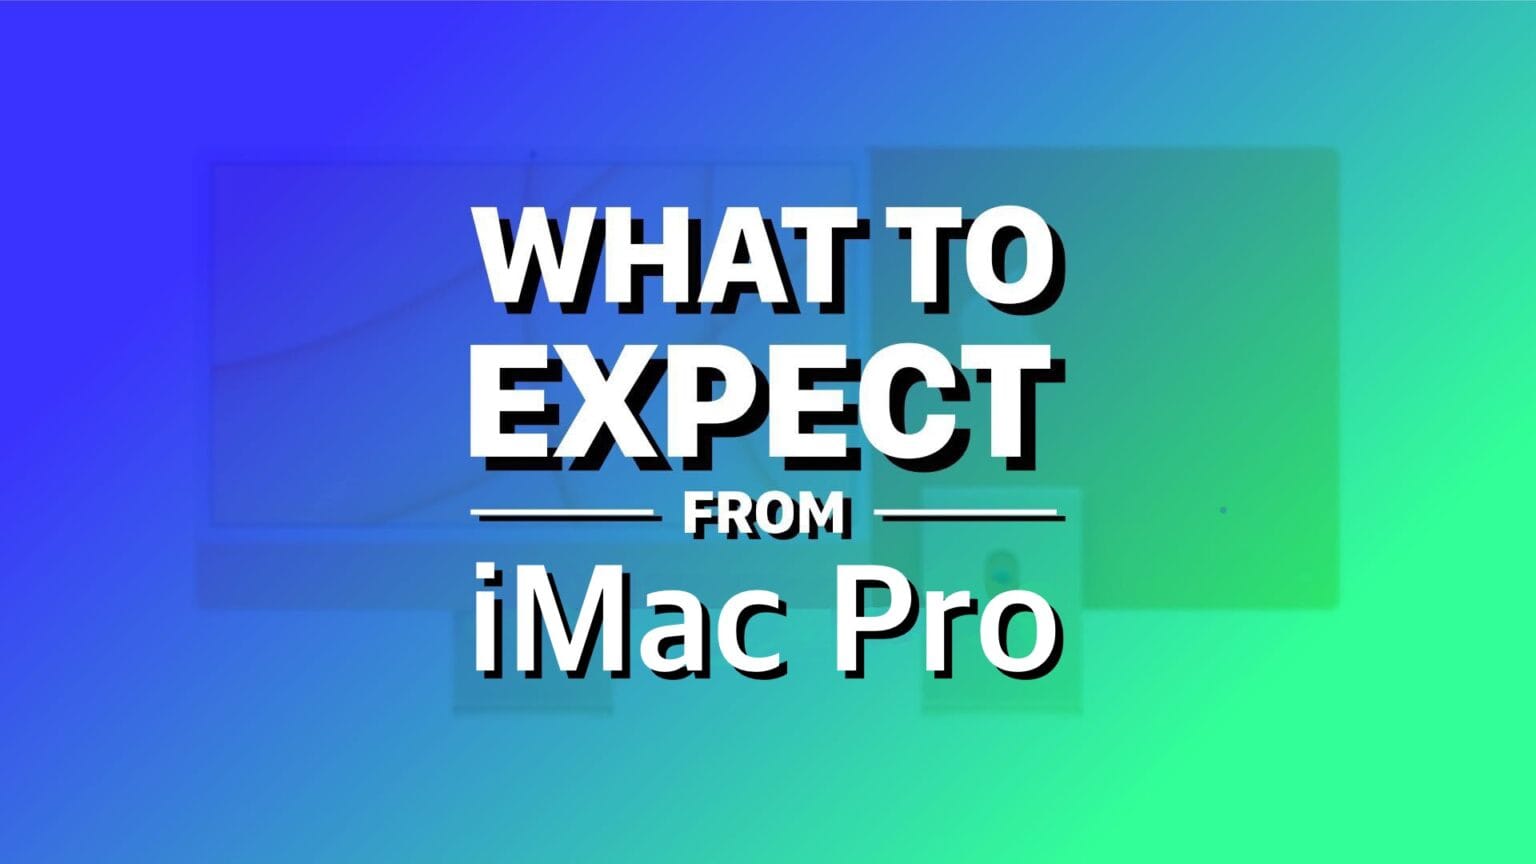 What to expect from iMac in 2022